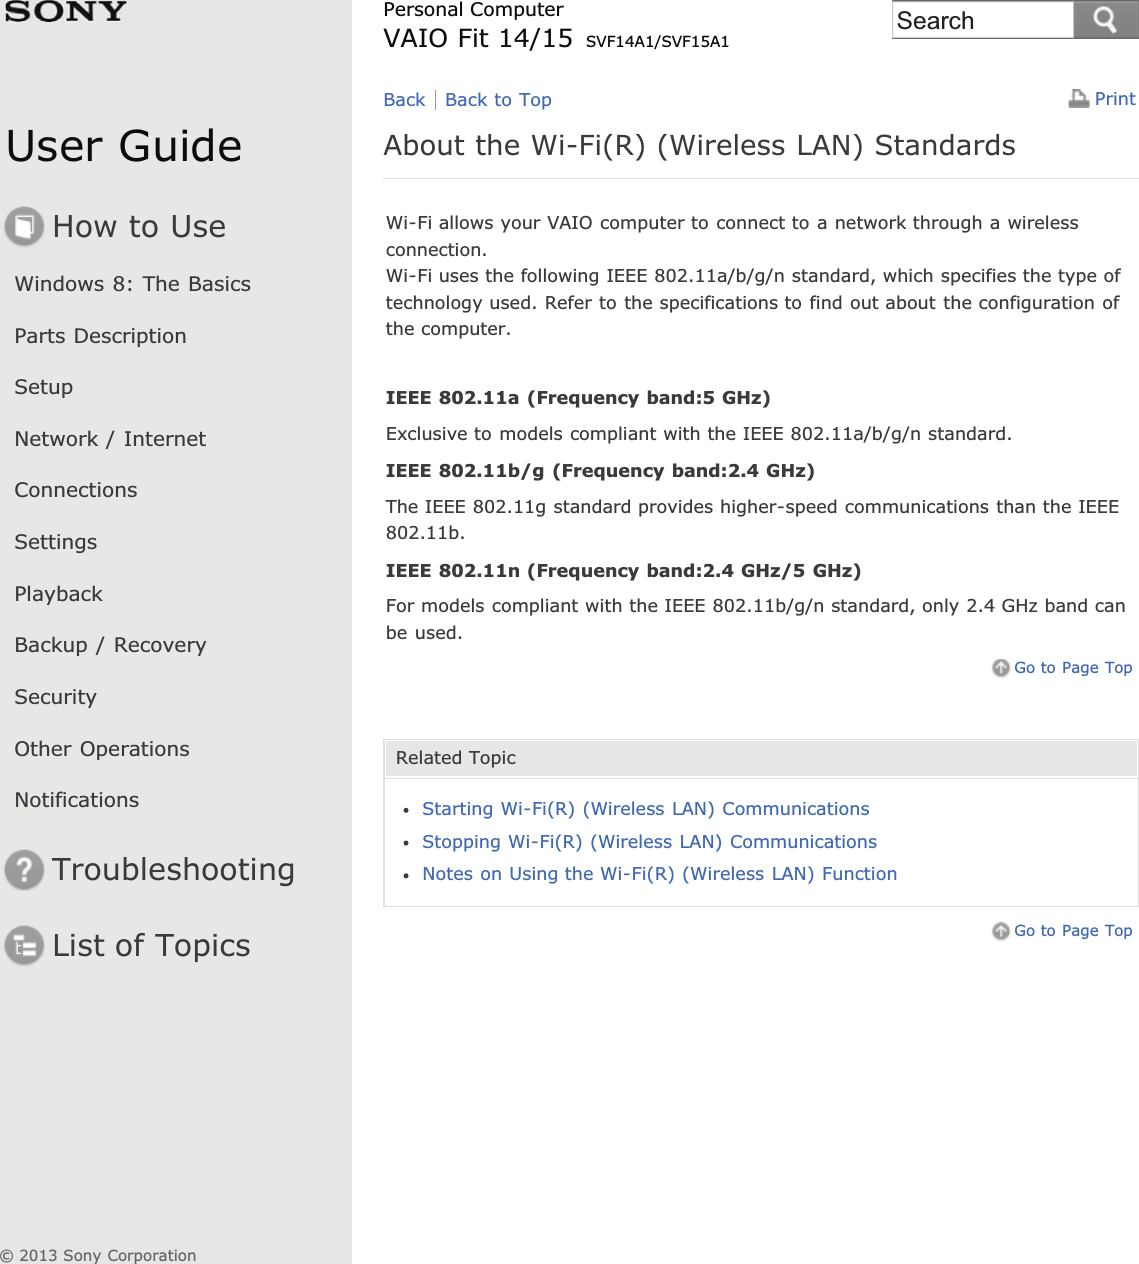 User GuideHow to UseWindows 8: The BasicsParts DescriptionSetupNetwork / InternetConnectionsSettingsPlaybackBackup / RecoverySecurityOther OperationsNotificationsTroubleshootingList of TopicsPrintPersonal ComputerVAIO Fit 14/15 SVF14A1/SVF15A1About the Wi-Fi(R) (Wireless LAN) StandardsWi-Fi allows your VAIO computer to connect to a network through a wirelessconnection.Wi-Fi uses the following IEEE 802.11a/b/g/n standard, which specifies the type oftechnology used. Refer to the specifications to find out about the configuration ofthe computer.IEEE 802.11a (Frequency band:5 GHz)Exclusive to models compliant with the IEEE 802.11a/b/g/n standard.IEEE 802.11b/g (Frequency band:2.4 GHz)The IEEE 802.11g standard provides higher-speed communications than the IEEE802.11b.IEEE 802.11n (Frequency band:2.4 GHz/5 GHz)For models compliant with the IEEE 802.11b/g/n standard, only 2.4 GHz band canbe used.Go to Page TopRelated TopicStarting Wi-Fi(R) (Wireless LAN) CommunicationsStopping Wi-Fi(R) (Wireless LAN) CommunicationsNotes on Using the Wi-Fi(R) (Wireless LAN) FunctionGo to Page TopBack Back to Top© 2013 Sony CorporationSearch